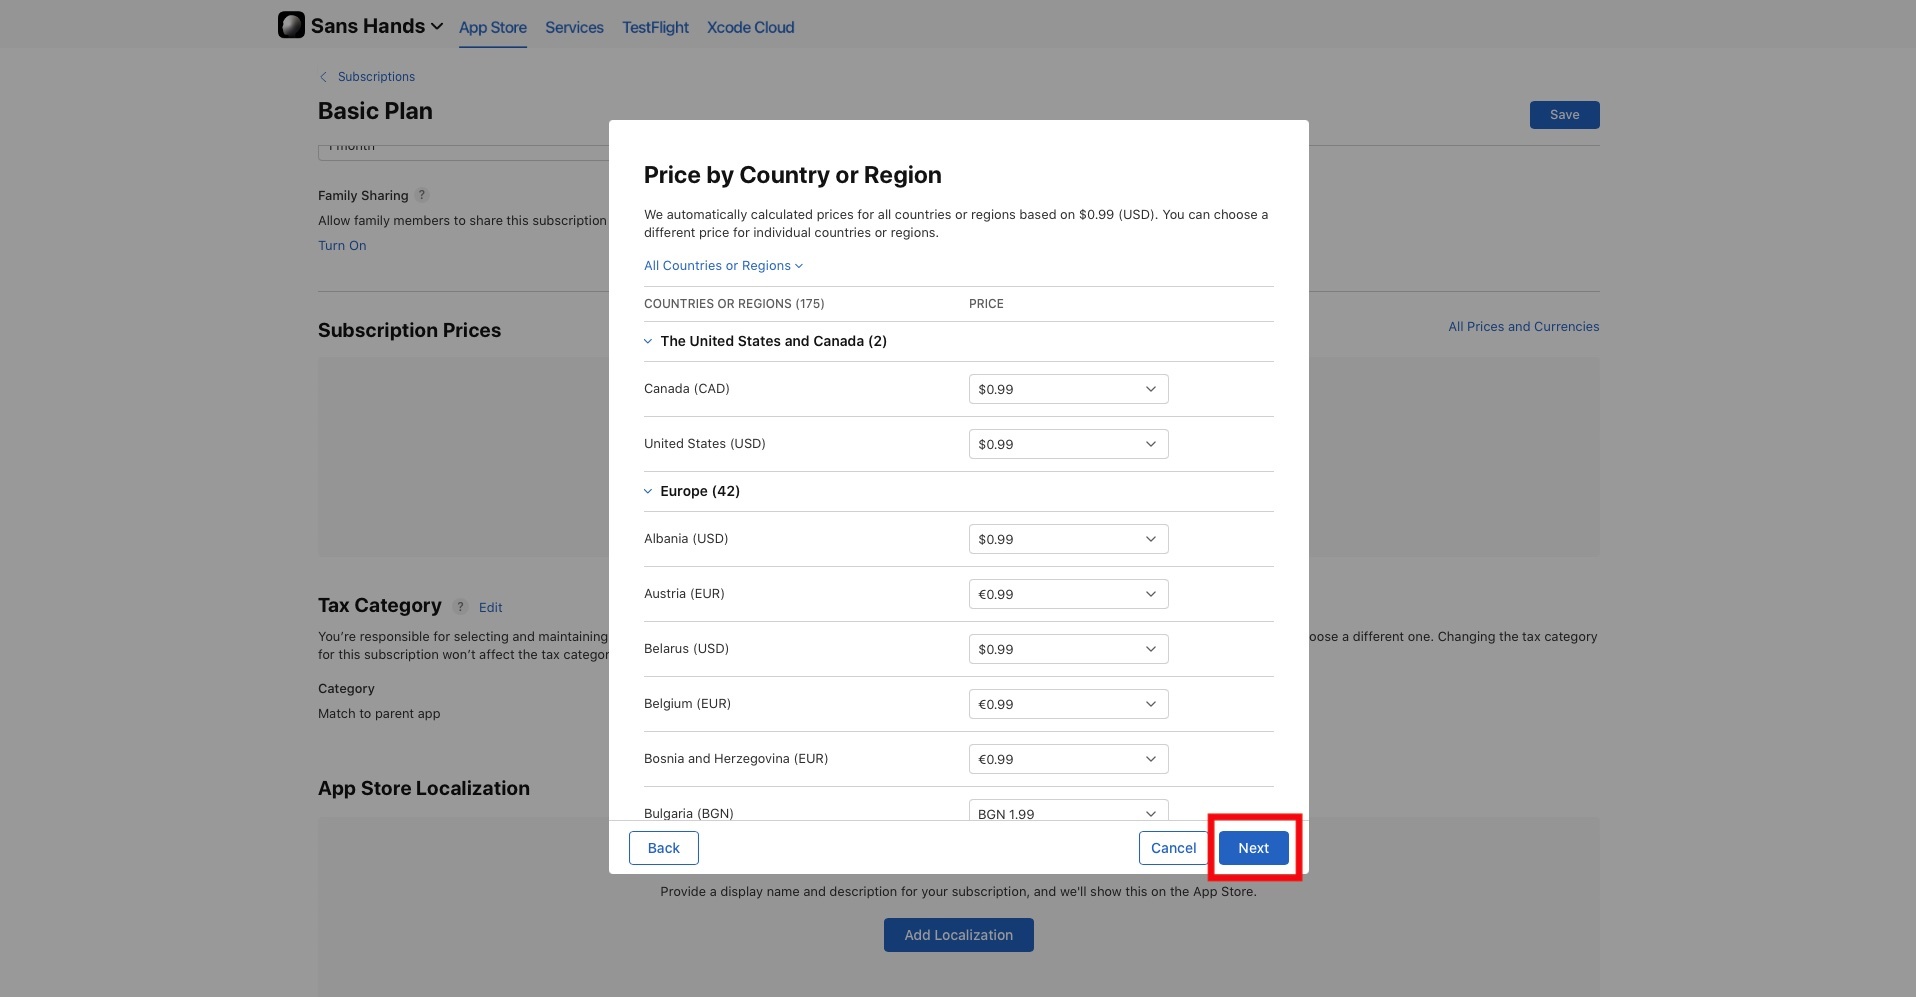 A screenshot of the Price by Country or Region modal that appears when you press next. It demonstrates that you can edit the prices of the subscription depending on the local. Once you have made any necessary changes, press the Next button that we have highlighted on the bottom right.